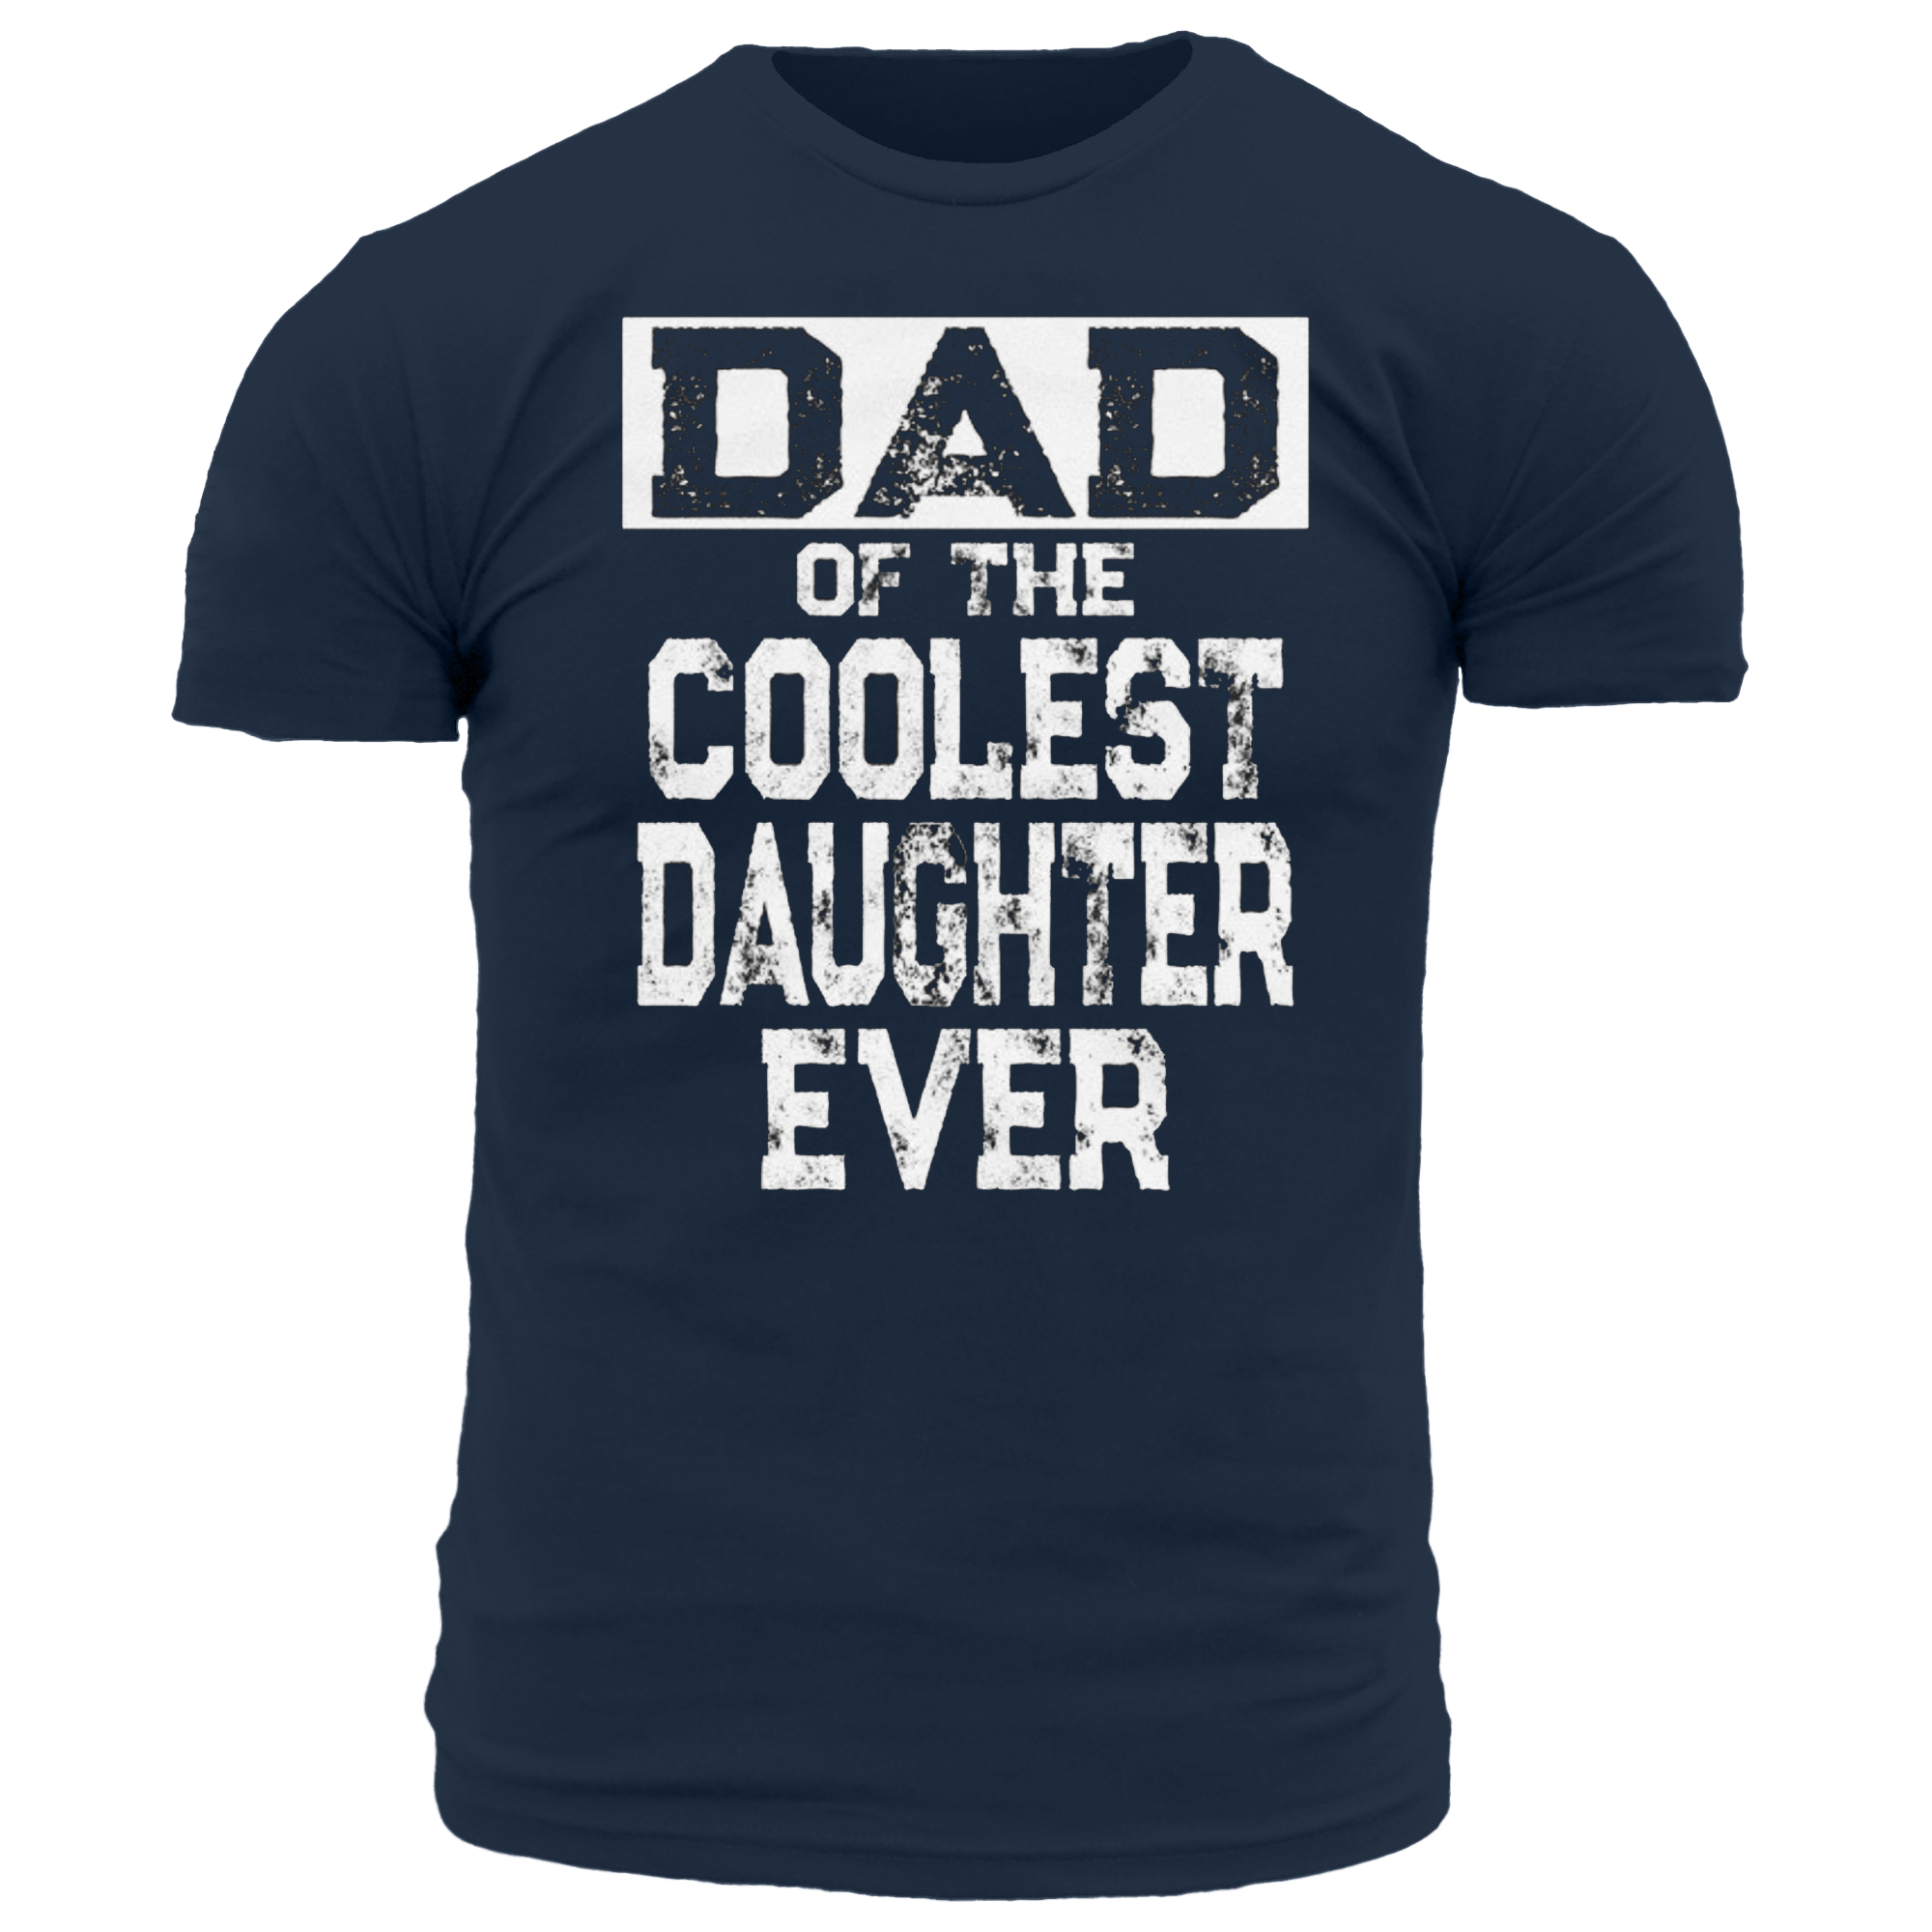 Dad Of The Coolest Chic Daughter Ever Men's Short Sleeve T-shirt